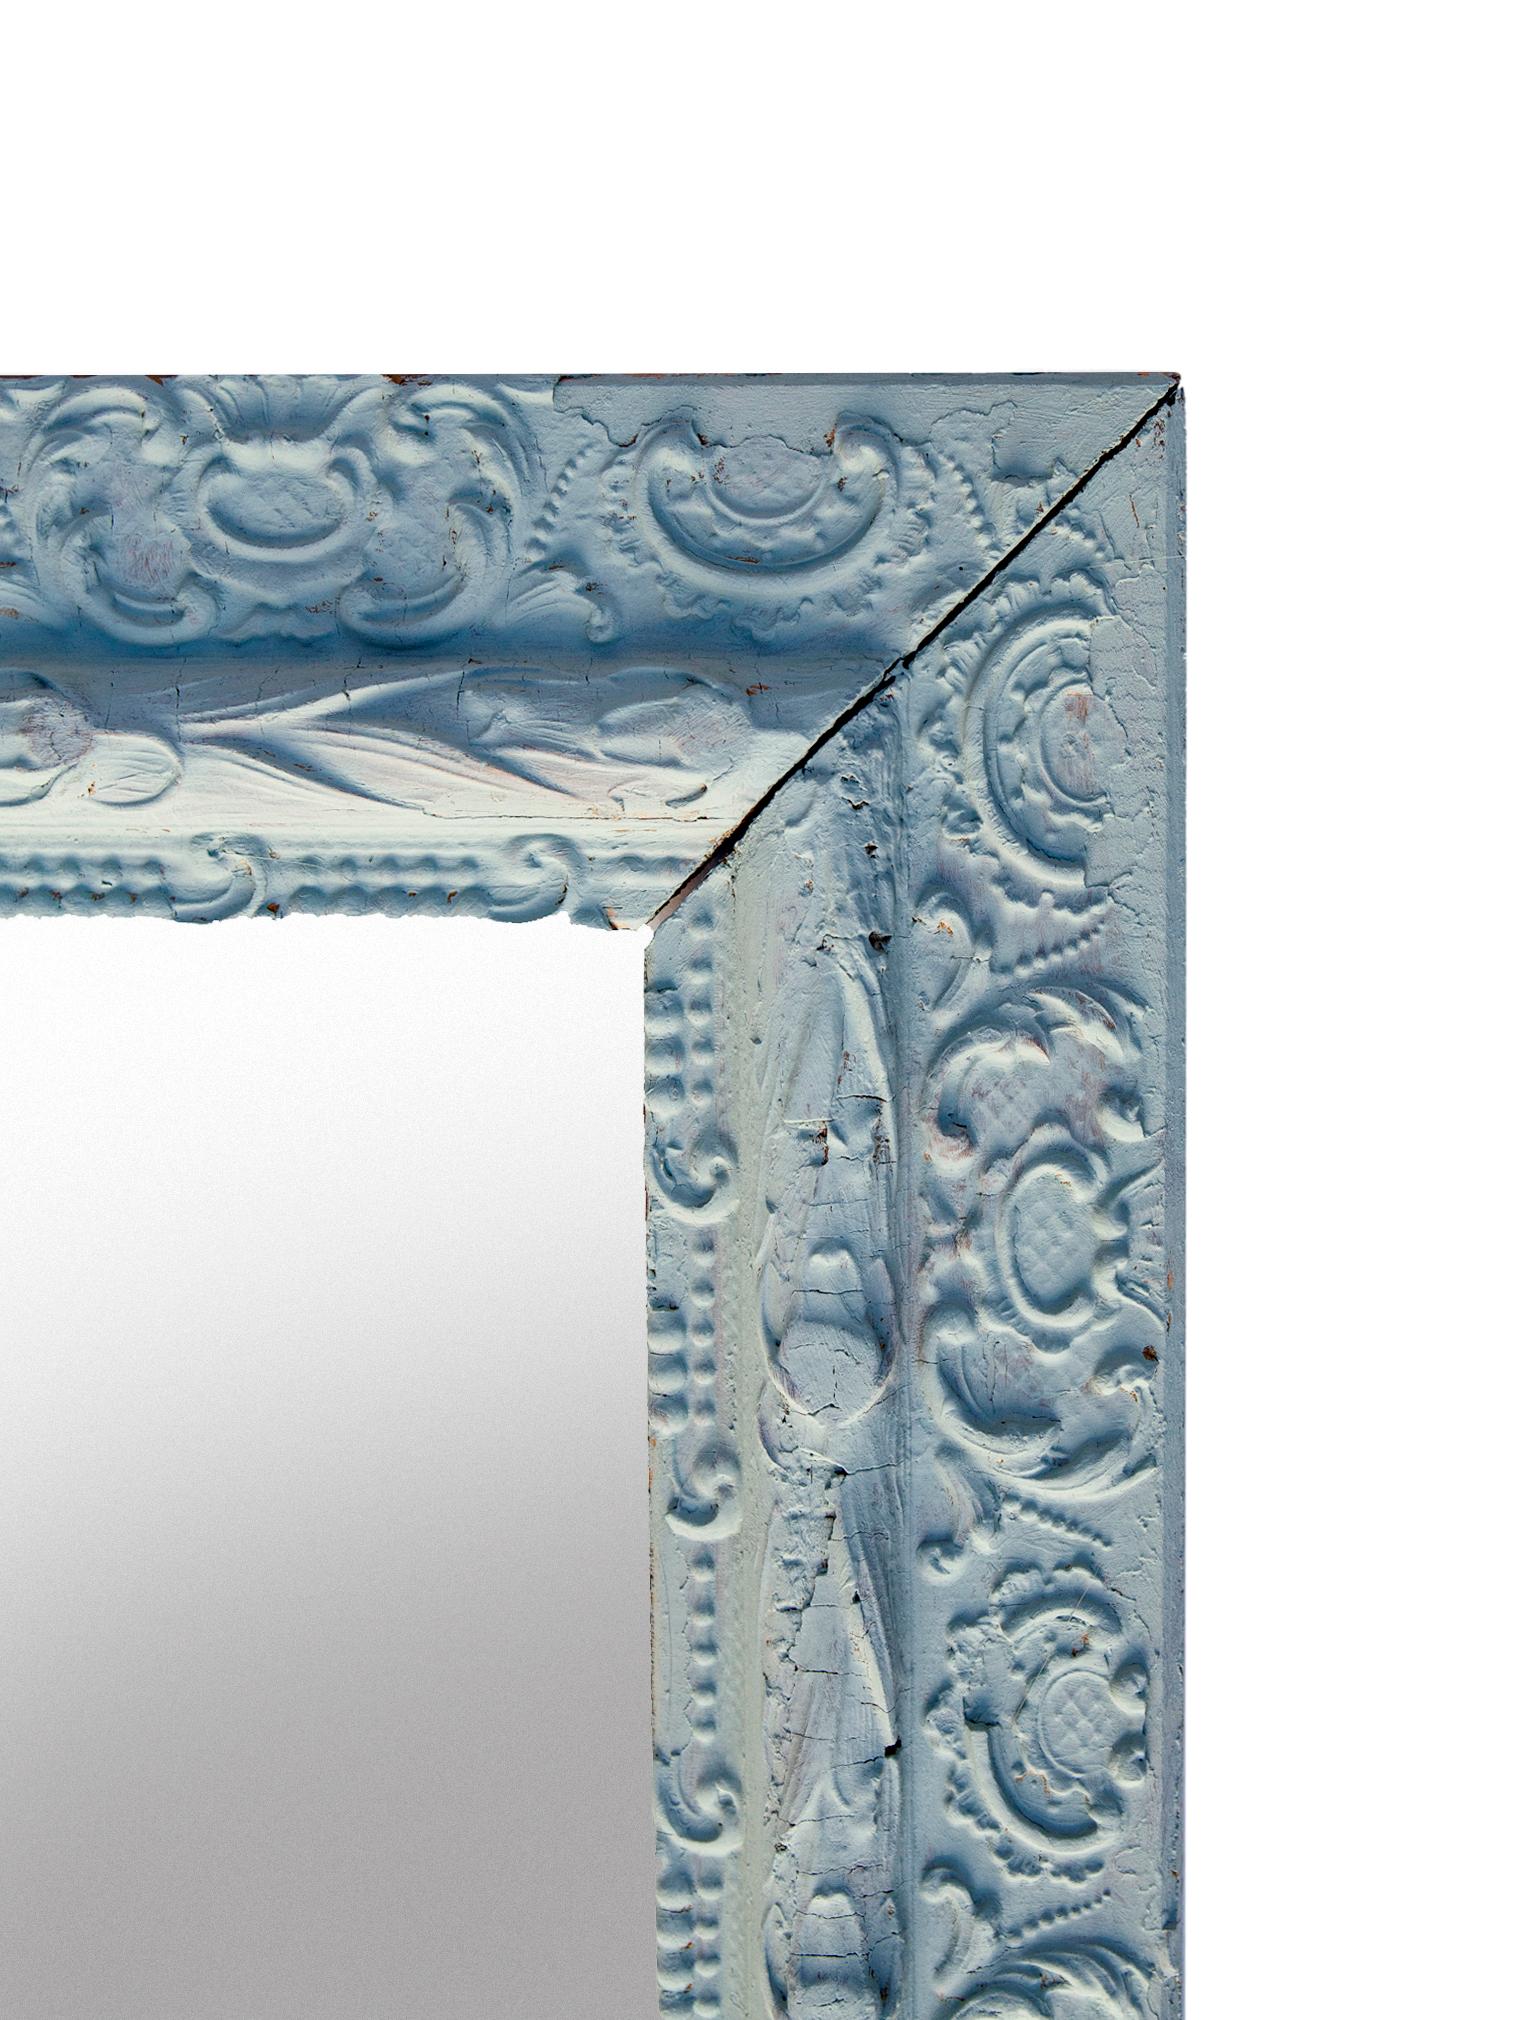 Shabby-ish Victorian blue mirror, with some chippy gesso, which is barely noticeable under the paint.
Lightweight with a flat profile, making this piece easy to hang just about anywhere.
New mirror & backing.